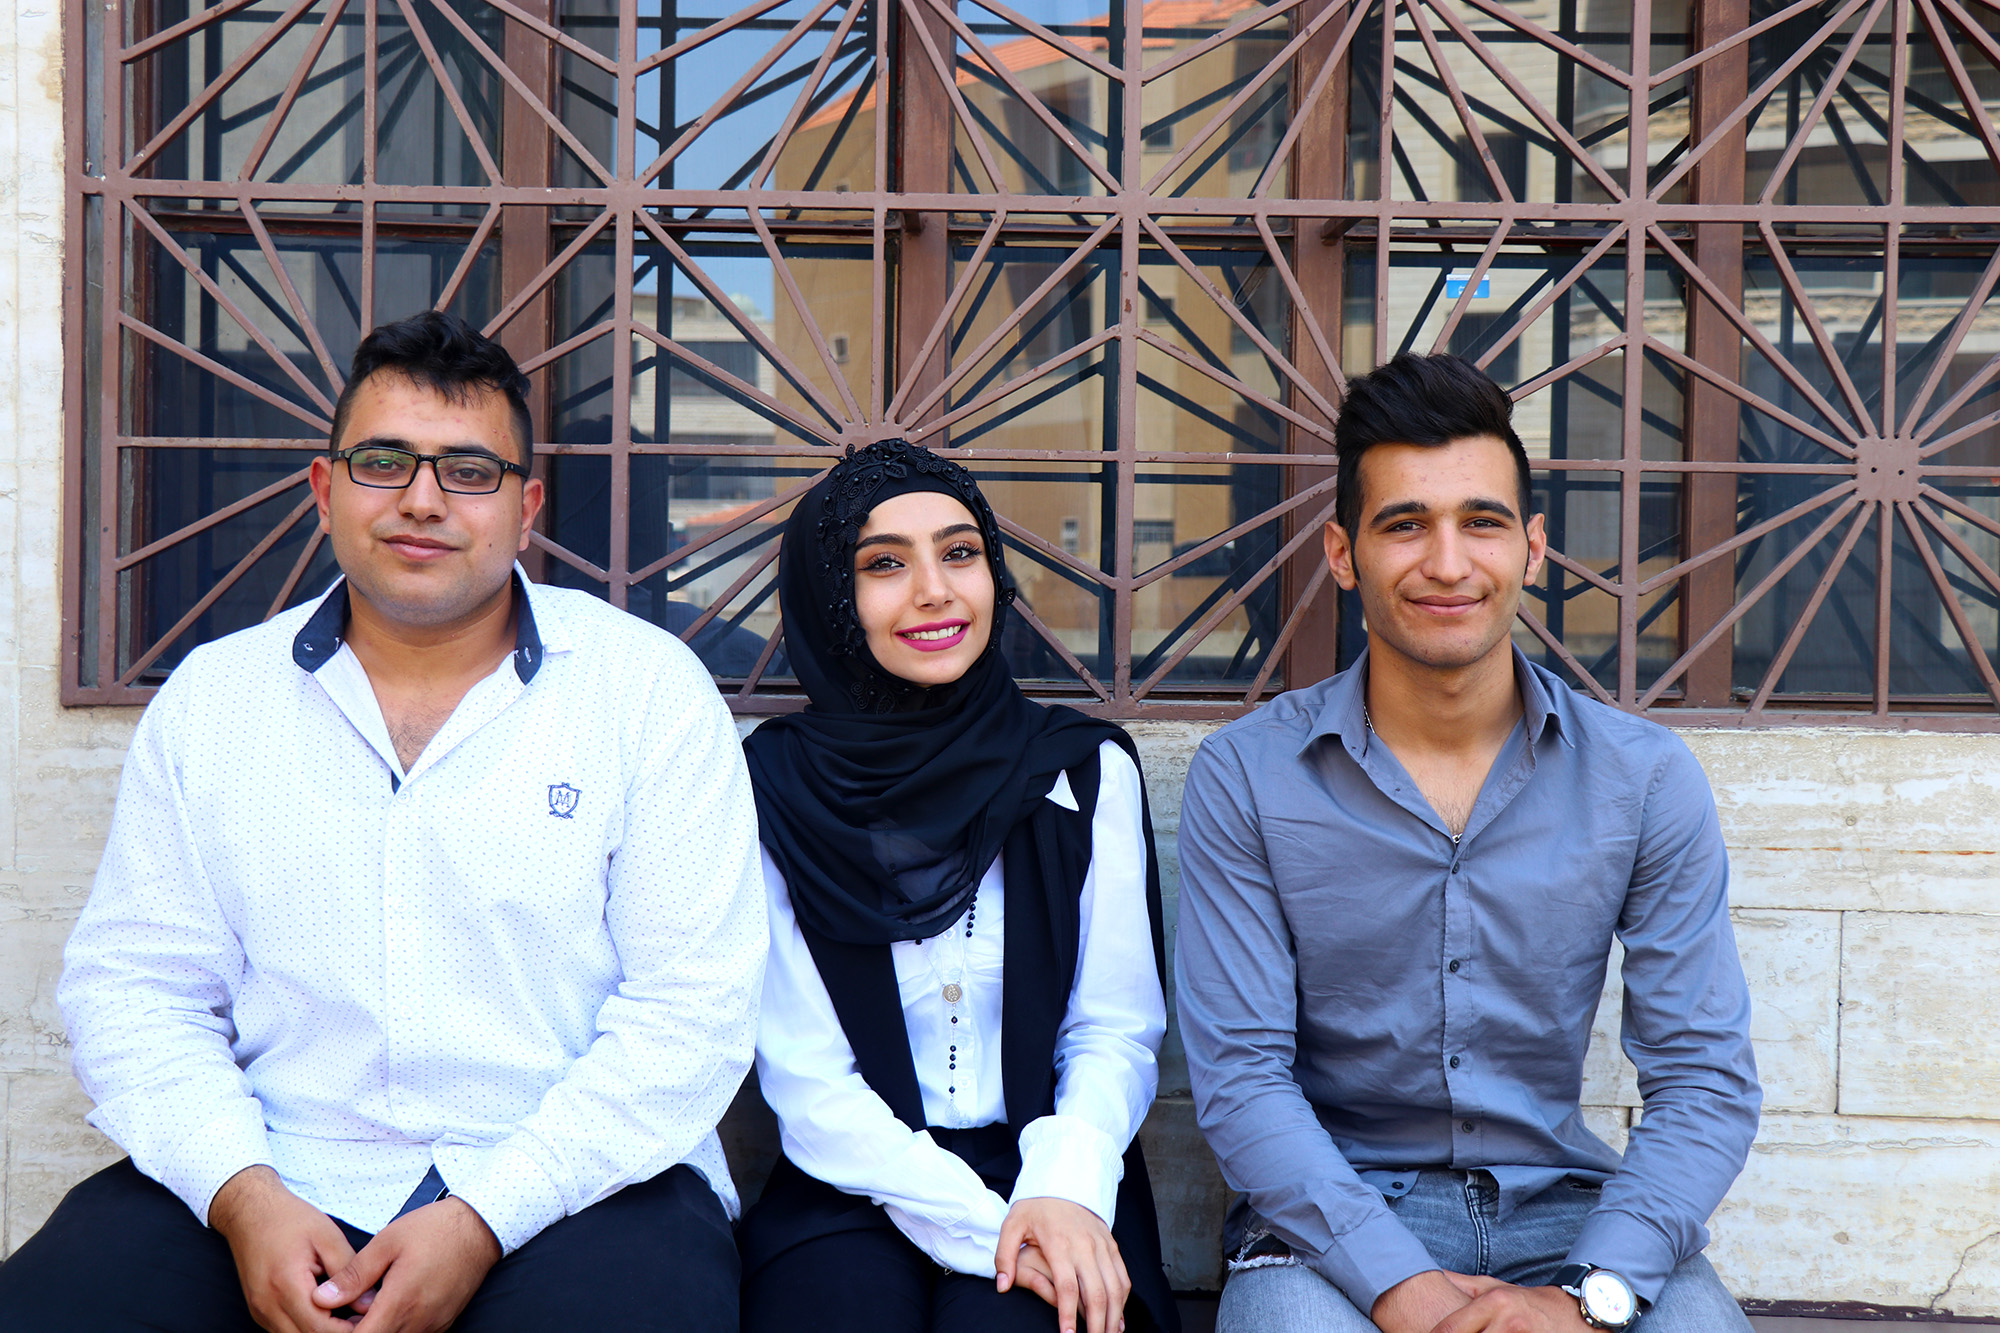 Mohammad, Douaa and Mostafa (L-R) excelled to such a degree at their chef training that the college decided to go big with the prize. They reached out to a catering business in Saudi Arabia which offered them a paid internship in Mecca during the pilgrimage season this summer. 